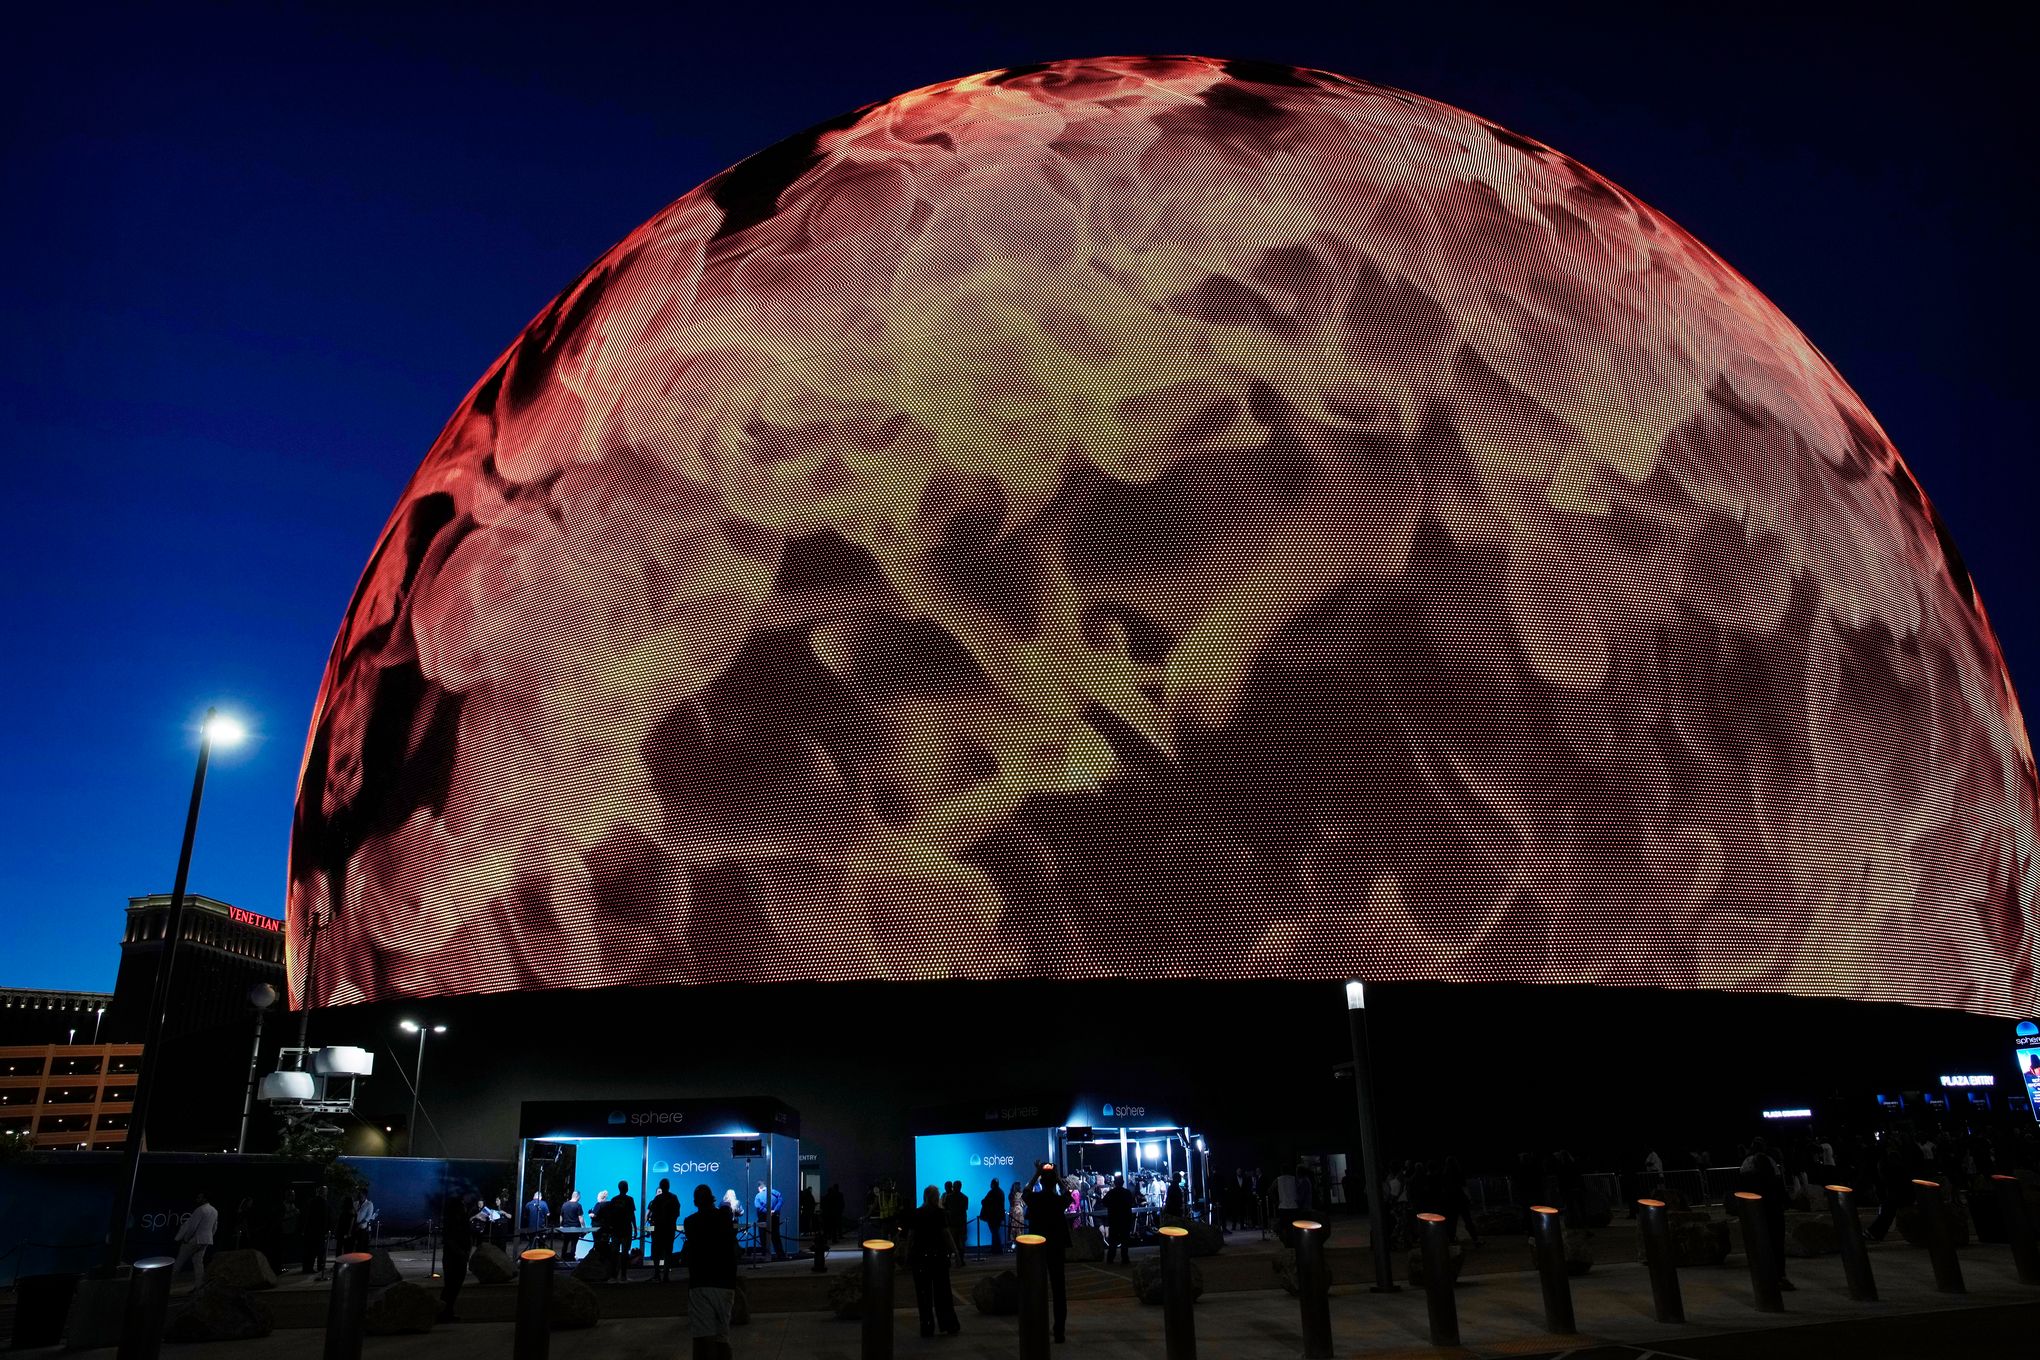 U2 Open Sphere in Las Vegas with Stunning Visual Technology